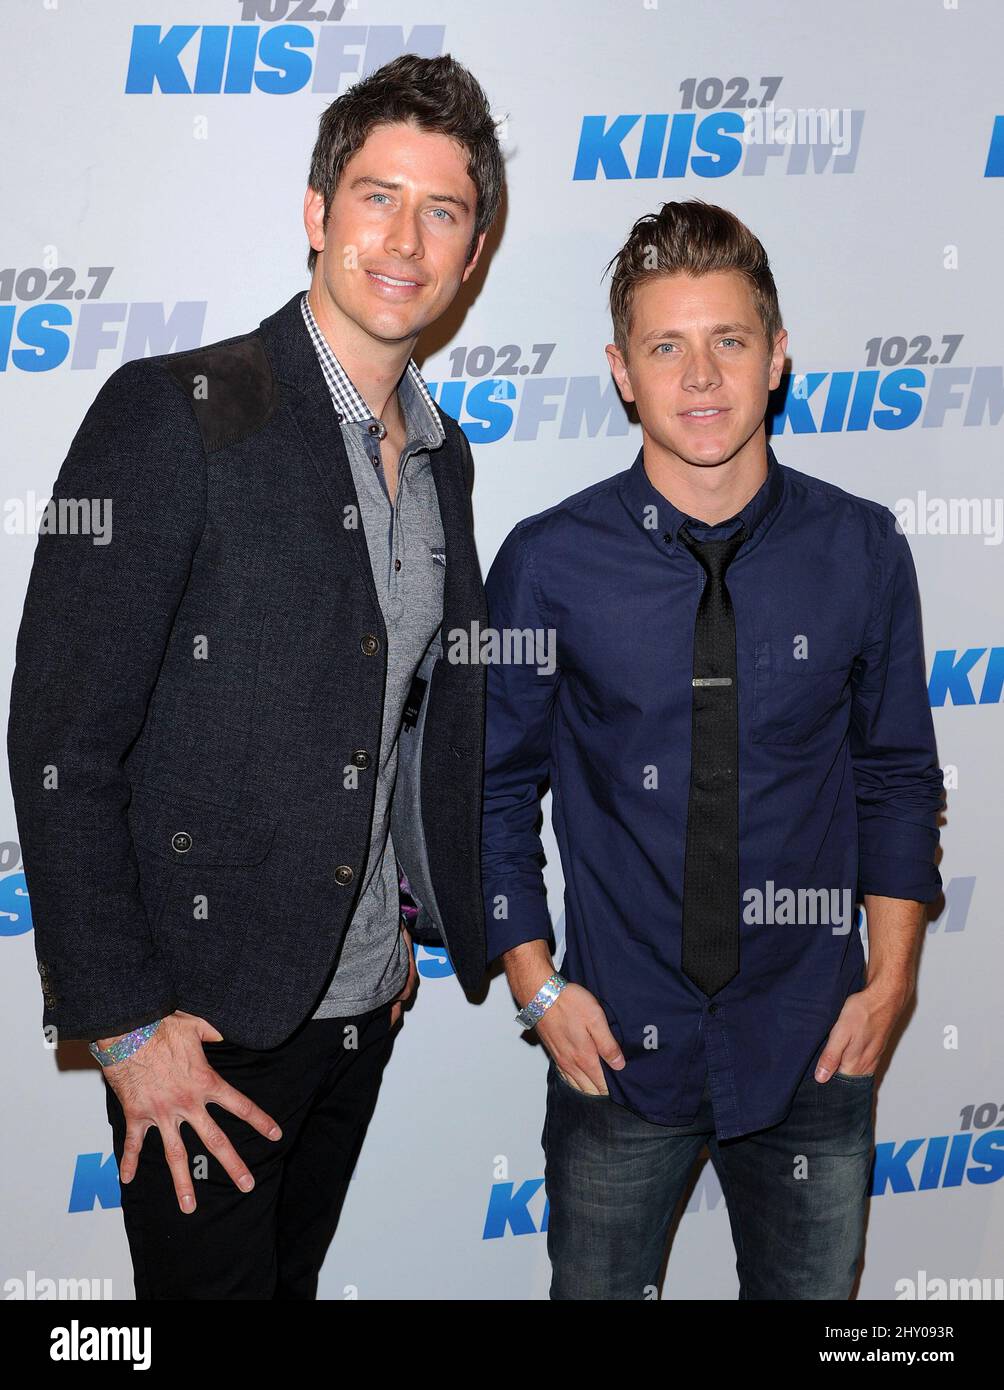 Arie Luyendyk and Jef Holm attending the 2012 KIIS FM 'Jingle Ball' Night 2 held at the Nokia Theatre in Los Angeles, USA. Stock Photo